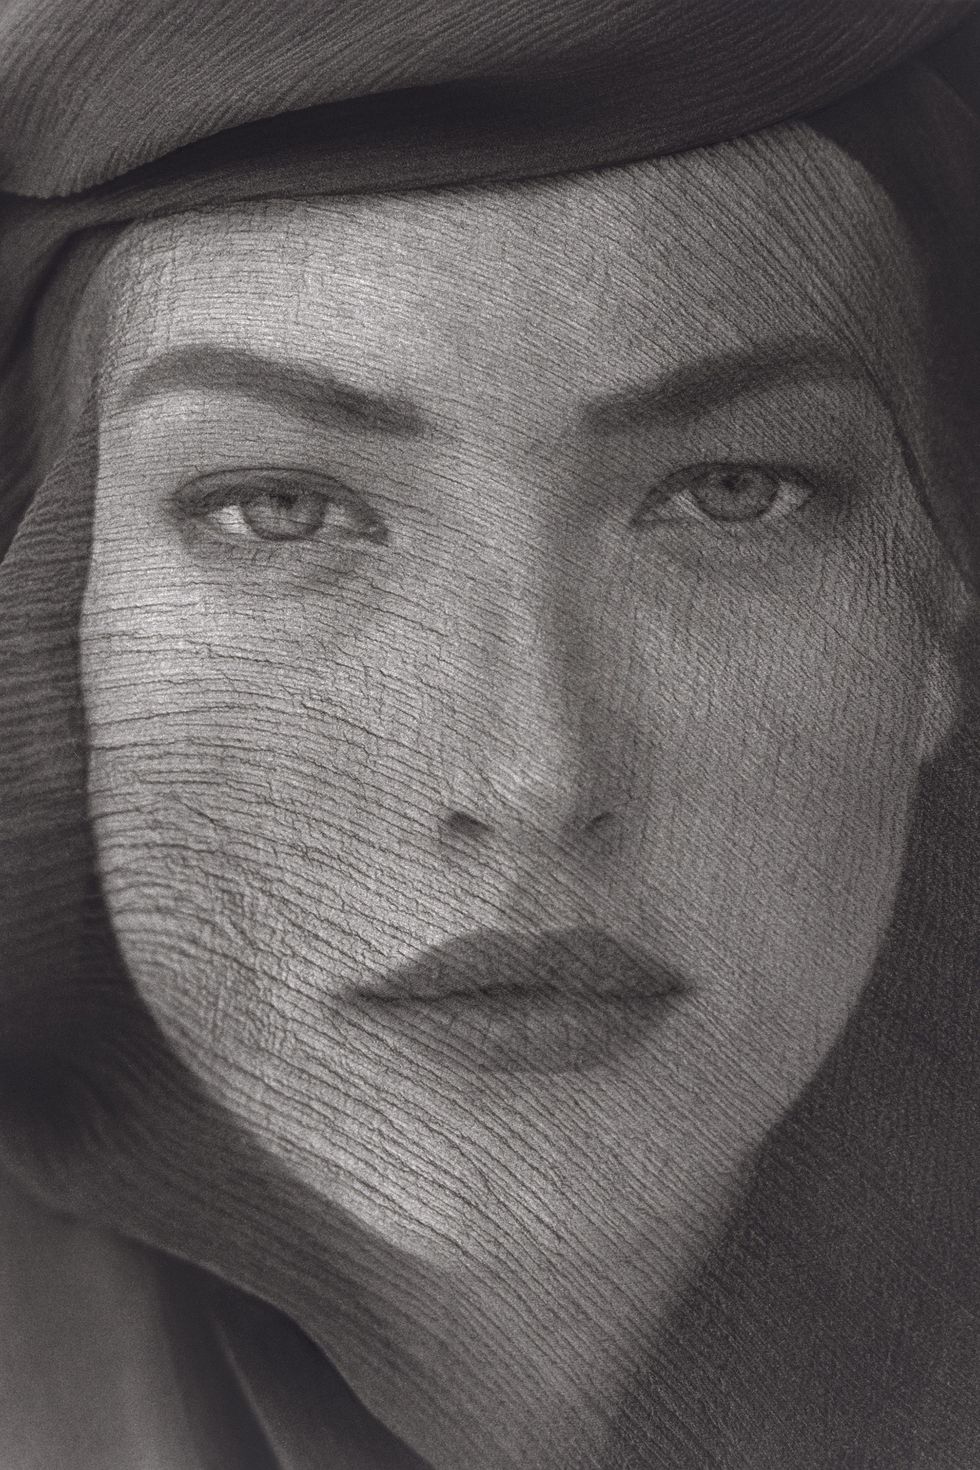 &#x9;Tatjana Veiled Head, Tight View, Joshua Tree&#x9;Herb Ritts (American, 1952–2002)&#x9;Restricted: For reference only&#x9;1988&#x9;Photograph, platinum print&#x9;*Museum of Fine Arts, Boston. Gift of Herb Ritts&#x9;*© Herb Ritts Foundation&#x9;*Photograph © Museum of Fine Arts, Boston